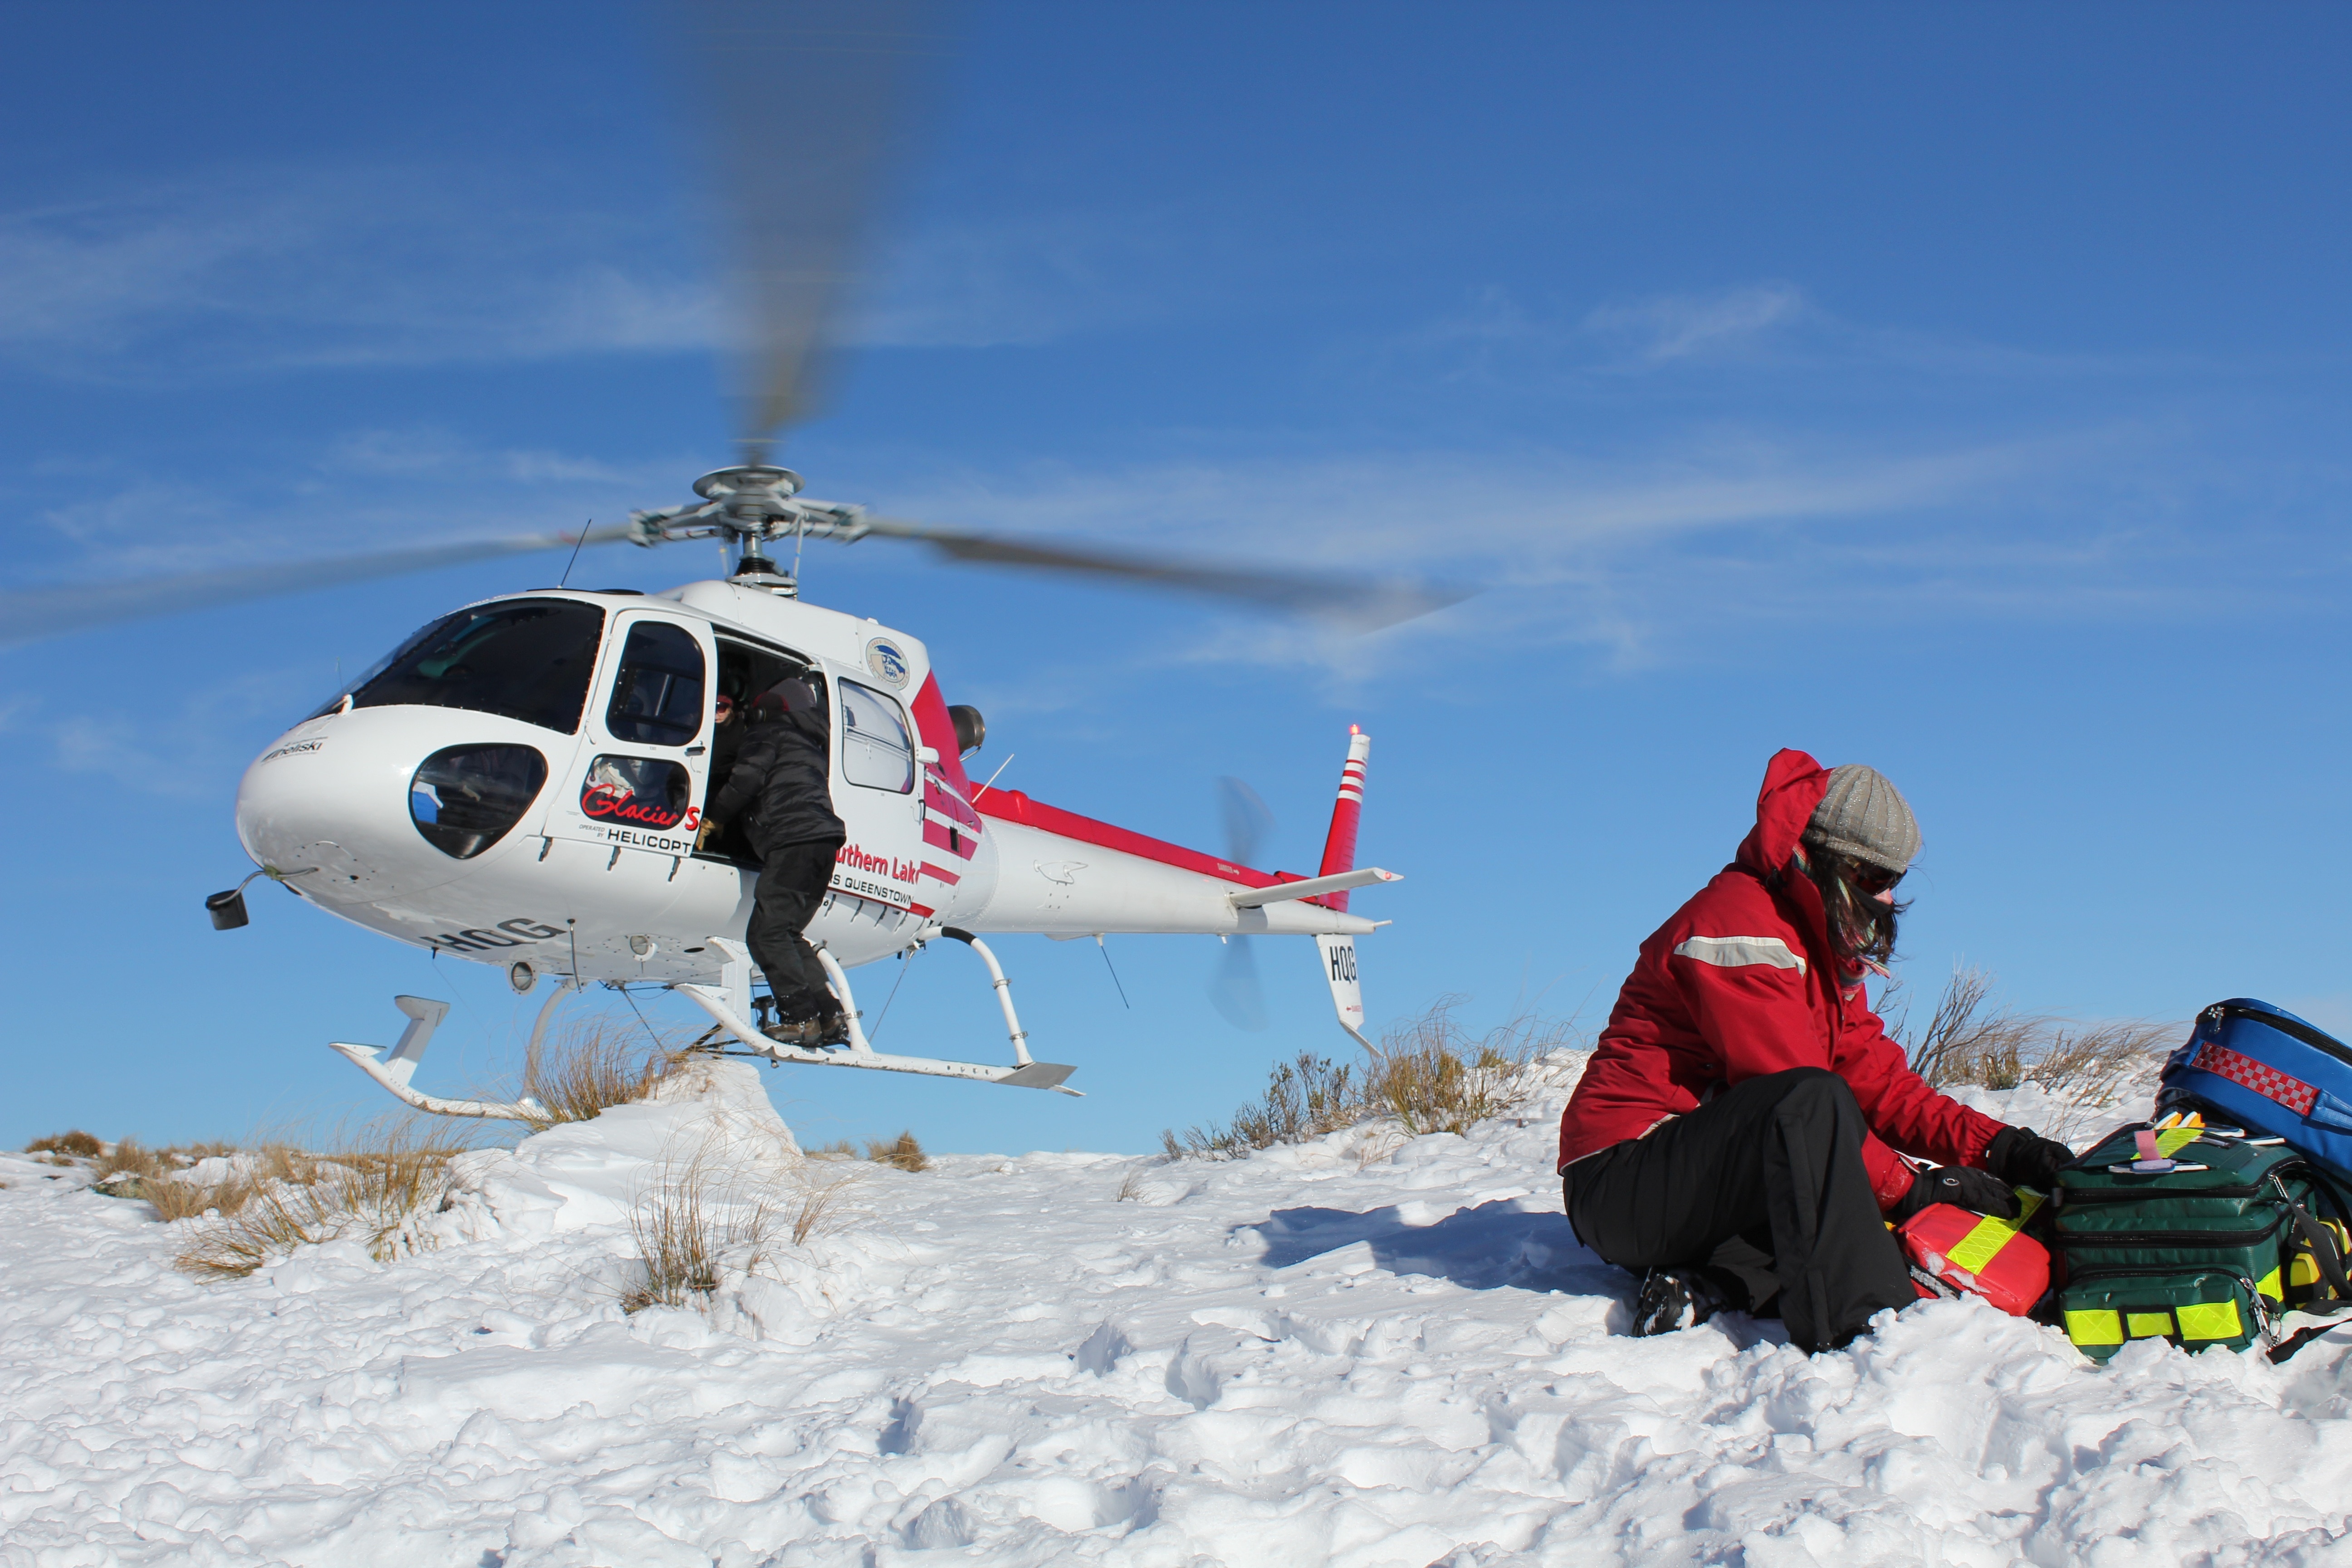 Medical, Ambulance, Helicopter, snow, winter